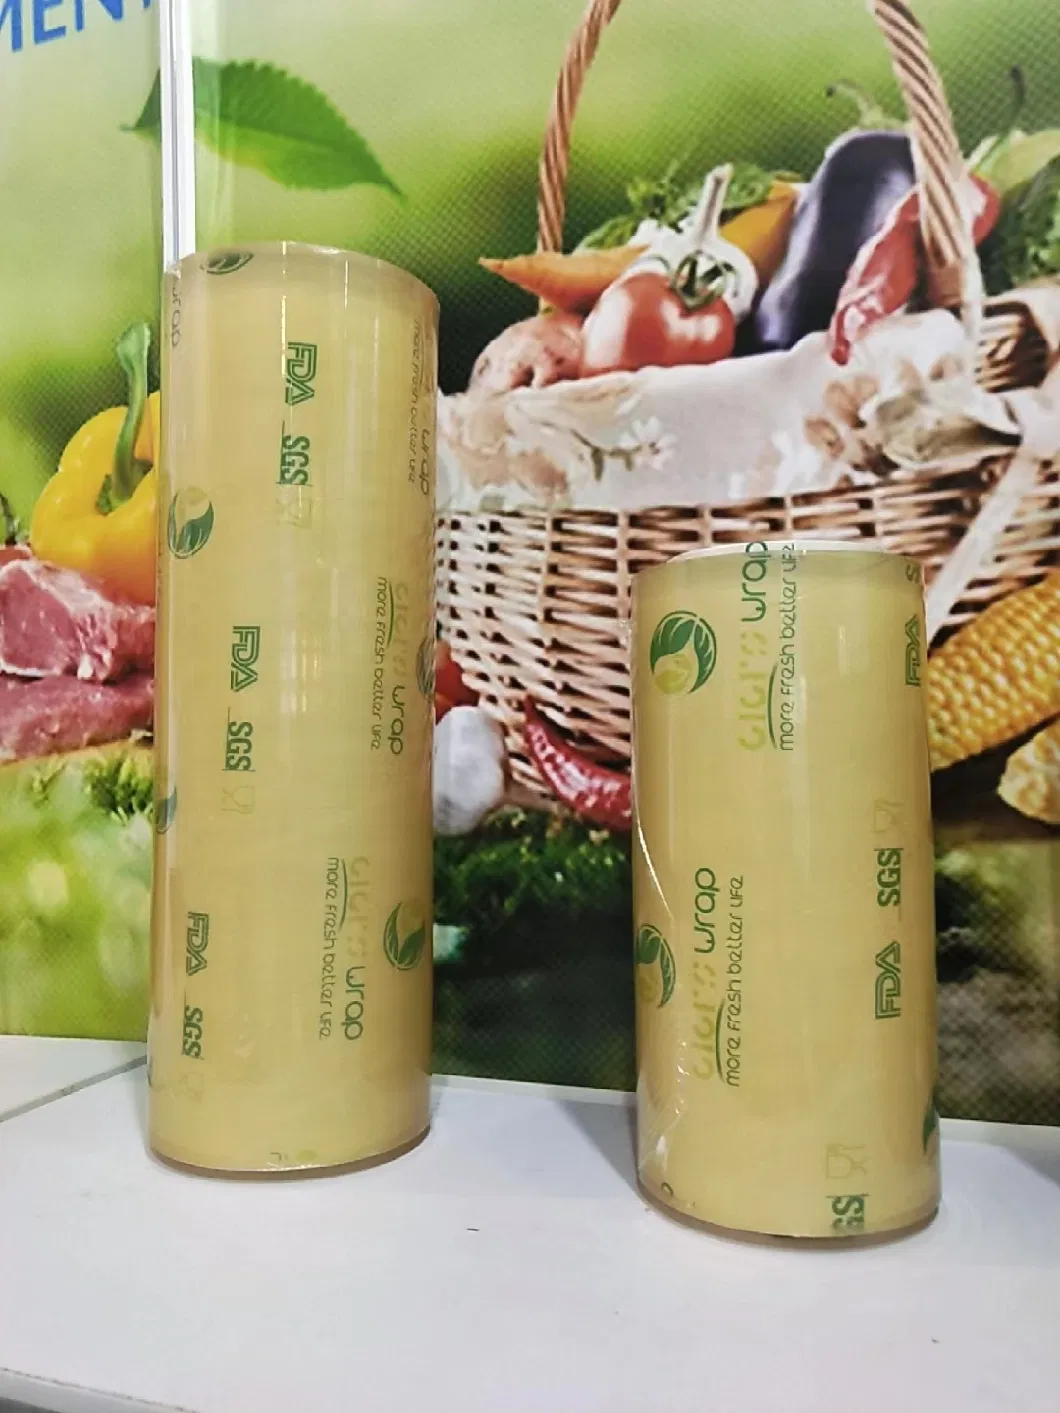 Keep Fresh Protect Food Plastic Reusable Eco Friendly Stretch PVC Cling Film